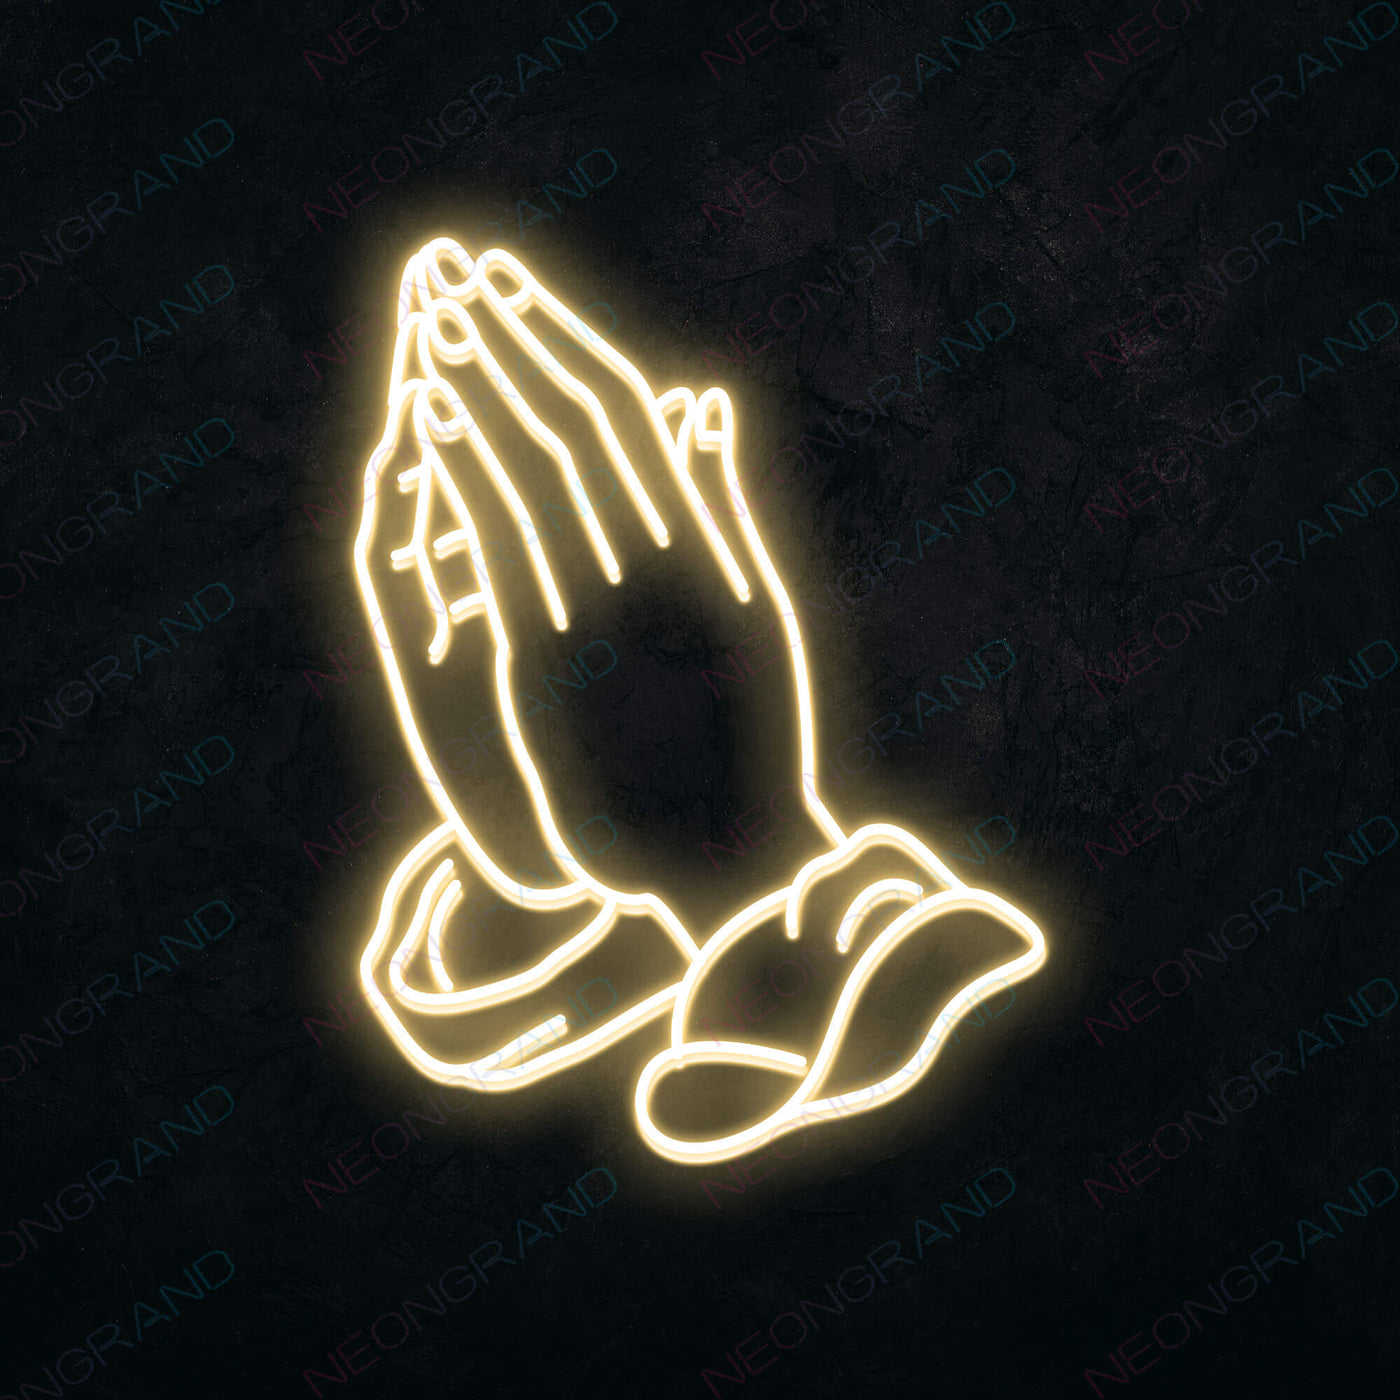 Neon Praying Hands Sign Led Light gold yellow